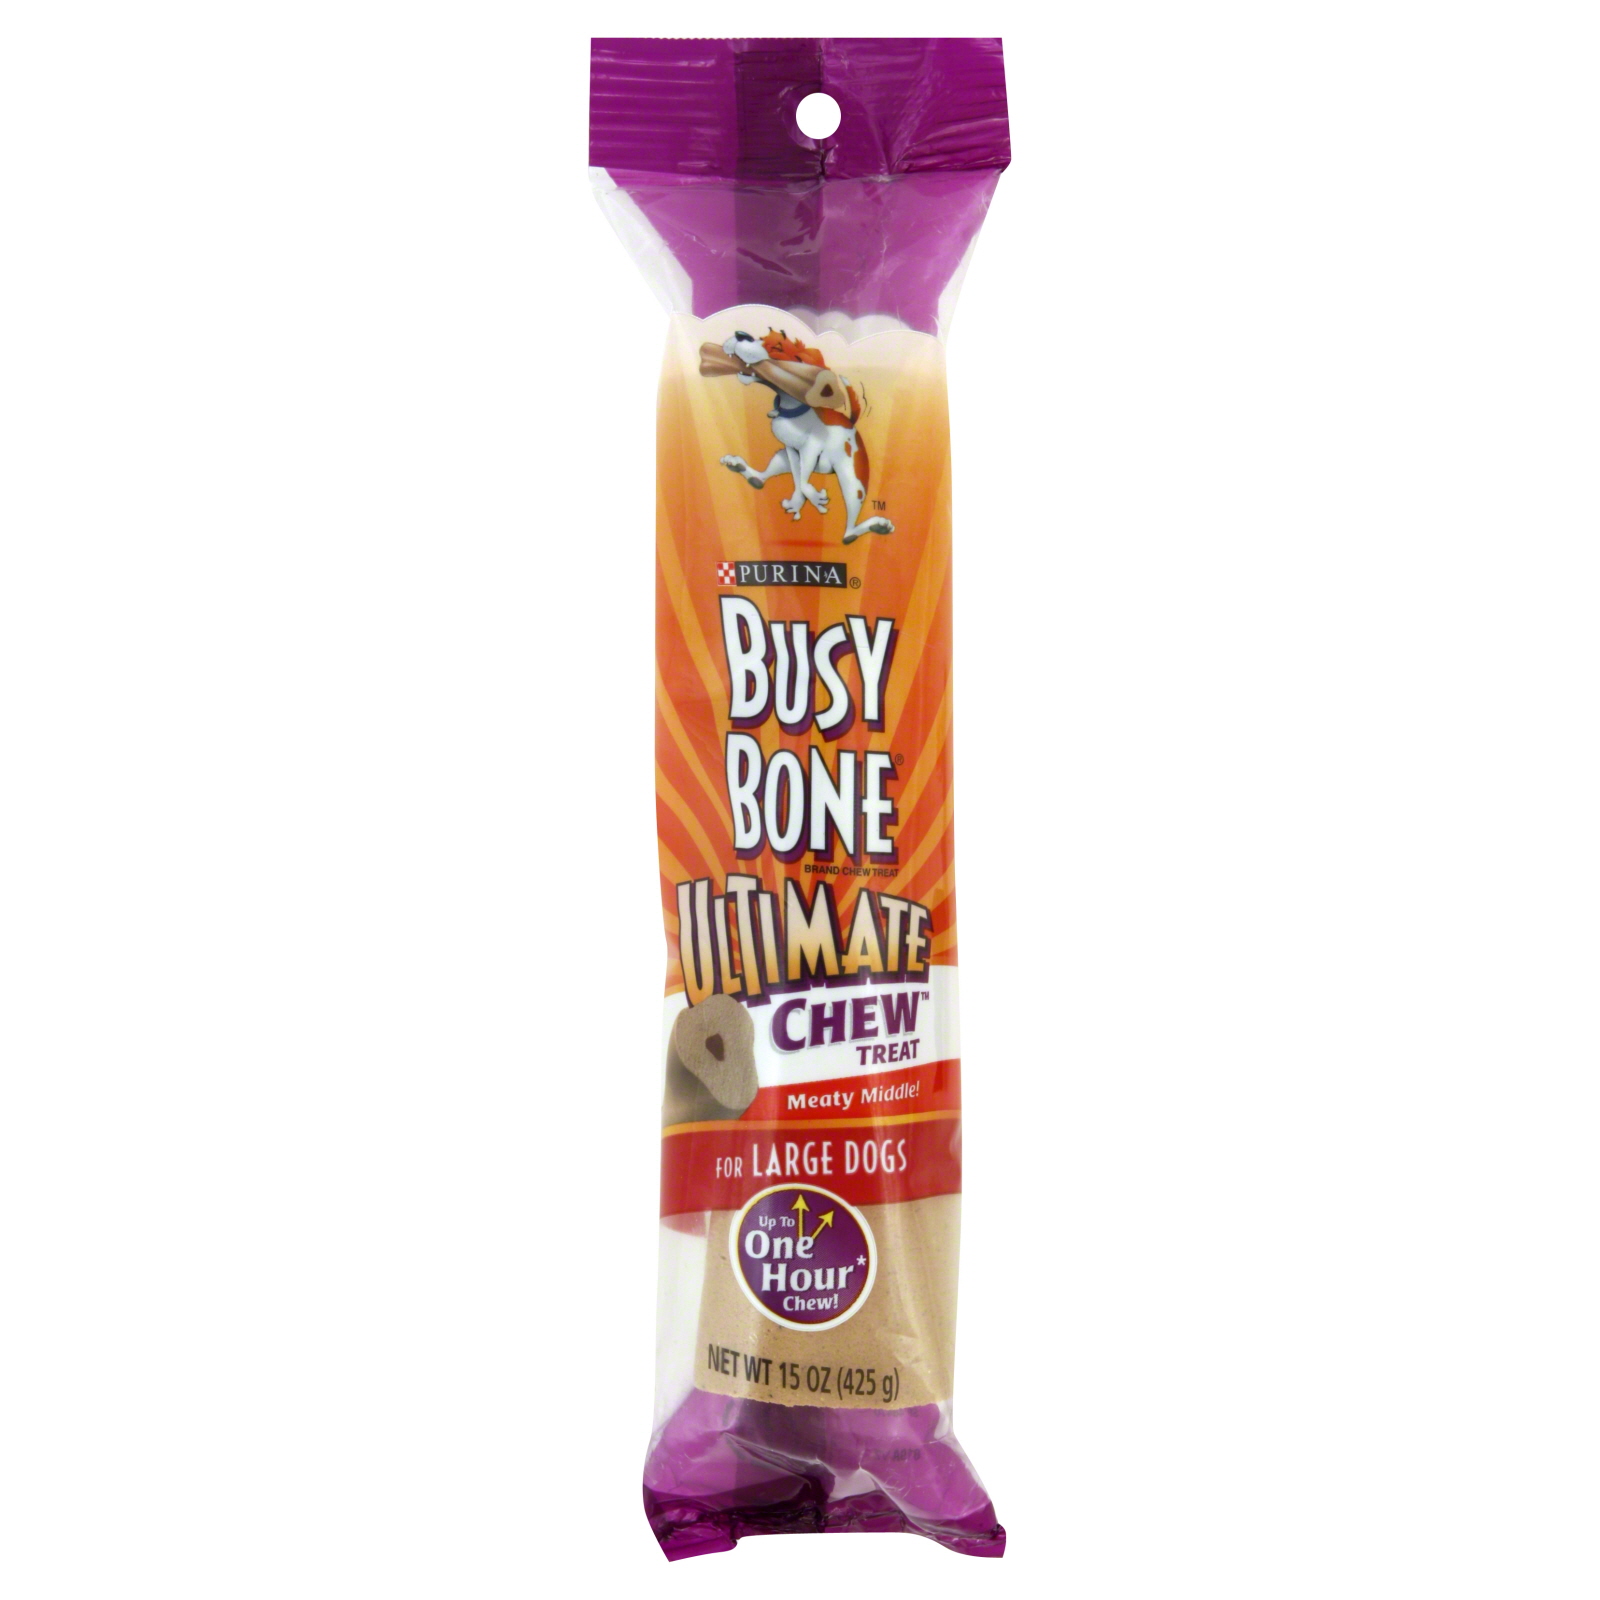 Purina Busy Bone Ultimate Chew Treat, for Large Dogs, Meaty Middle, 15 oz (425 g)